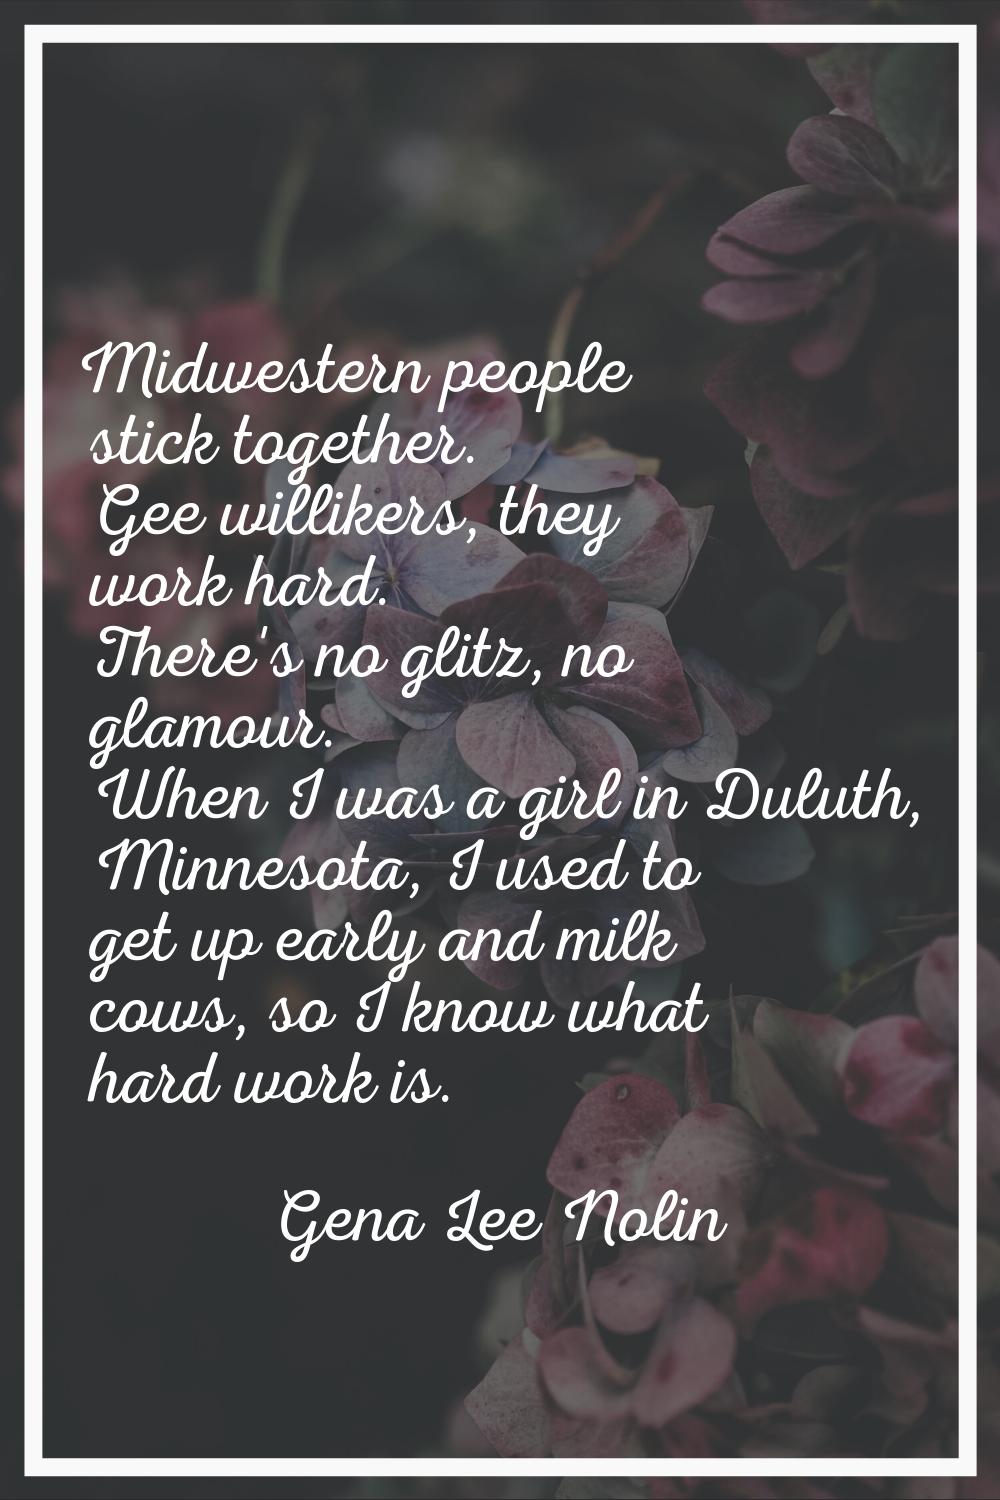 Midwestern people stick together. Gee willikers, they work hard. There's no glitz, no glamour. When